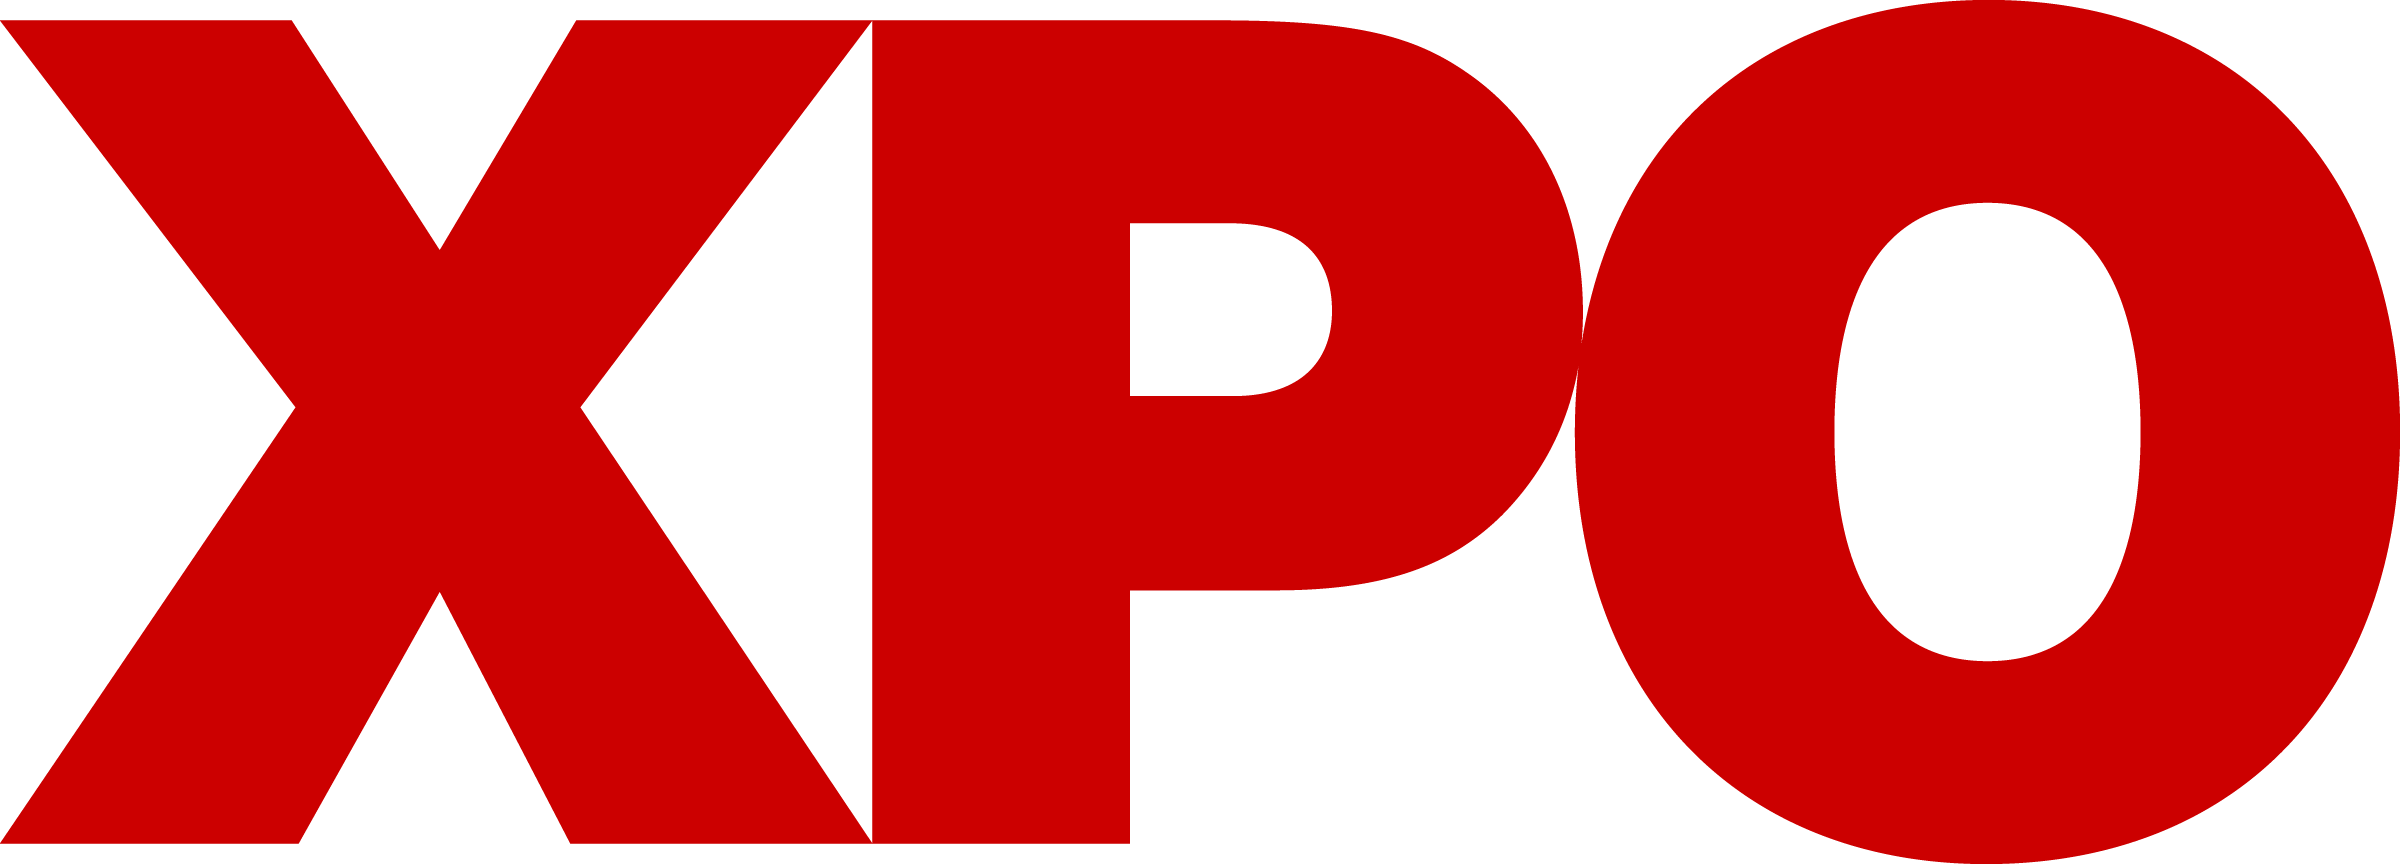 XPO Named National Less-Than-Truckload Carrier of the Year by GlobalTranz 378aec62-5d02-4947-a49f-6b239fc7402d?size=1